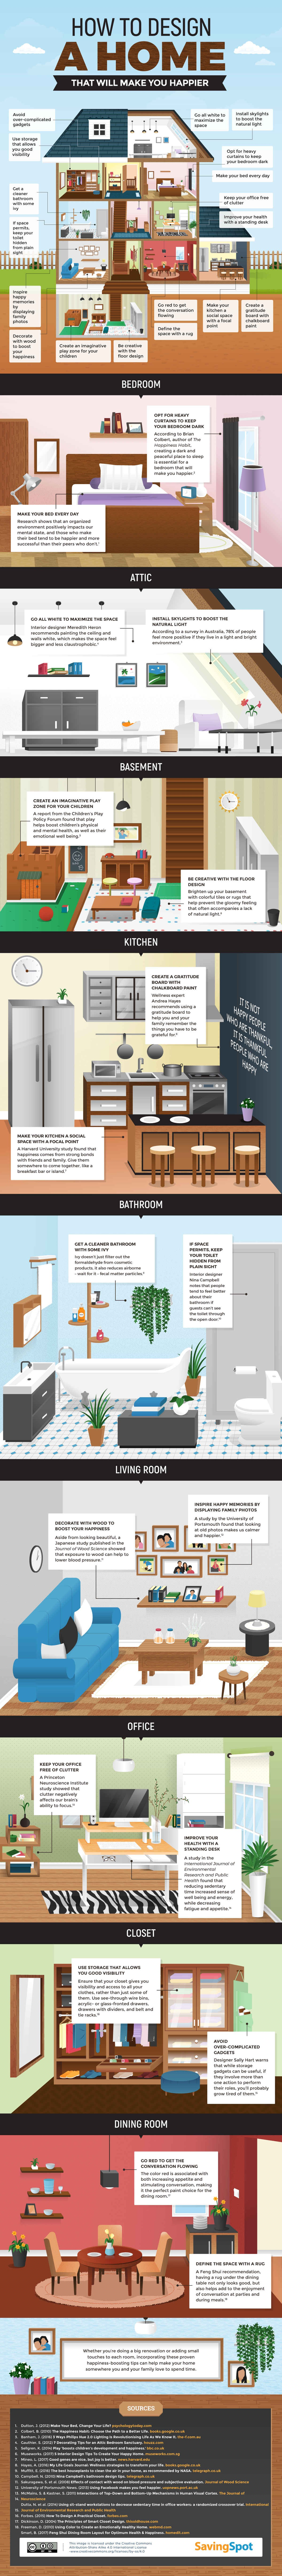 How to Design a Home That Will Make You Happier #Infographic